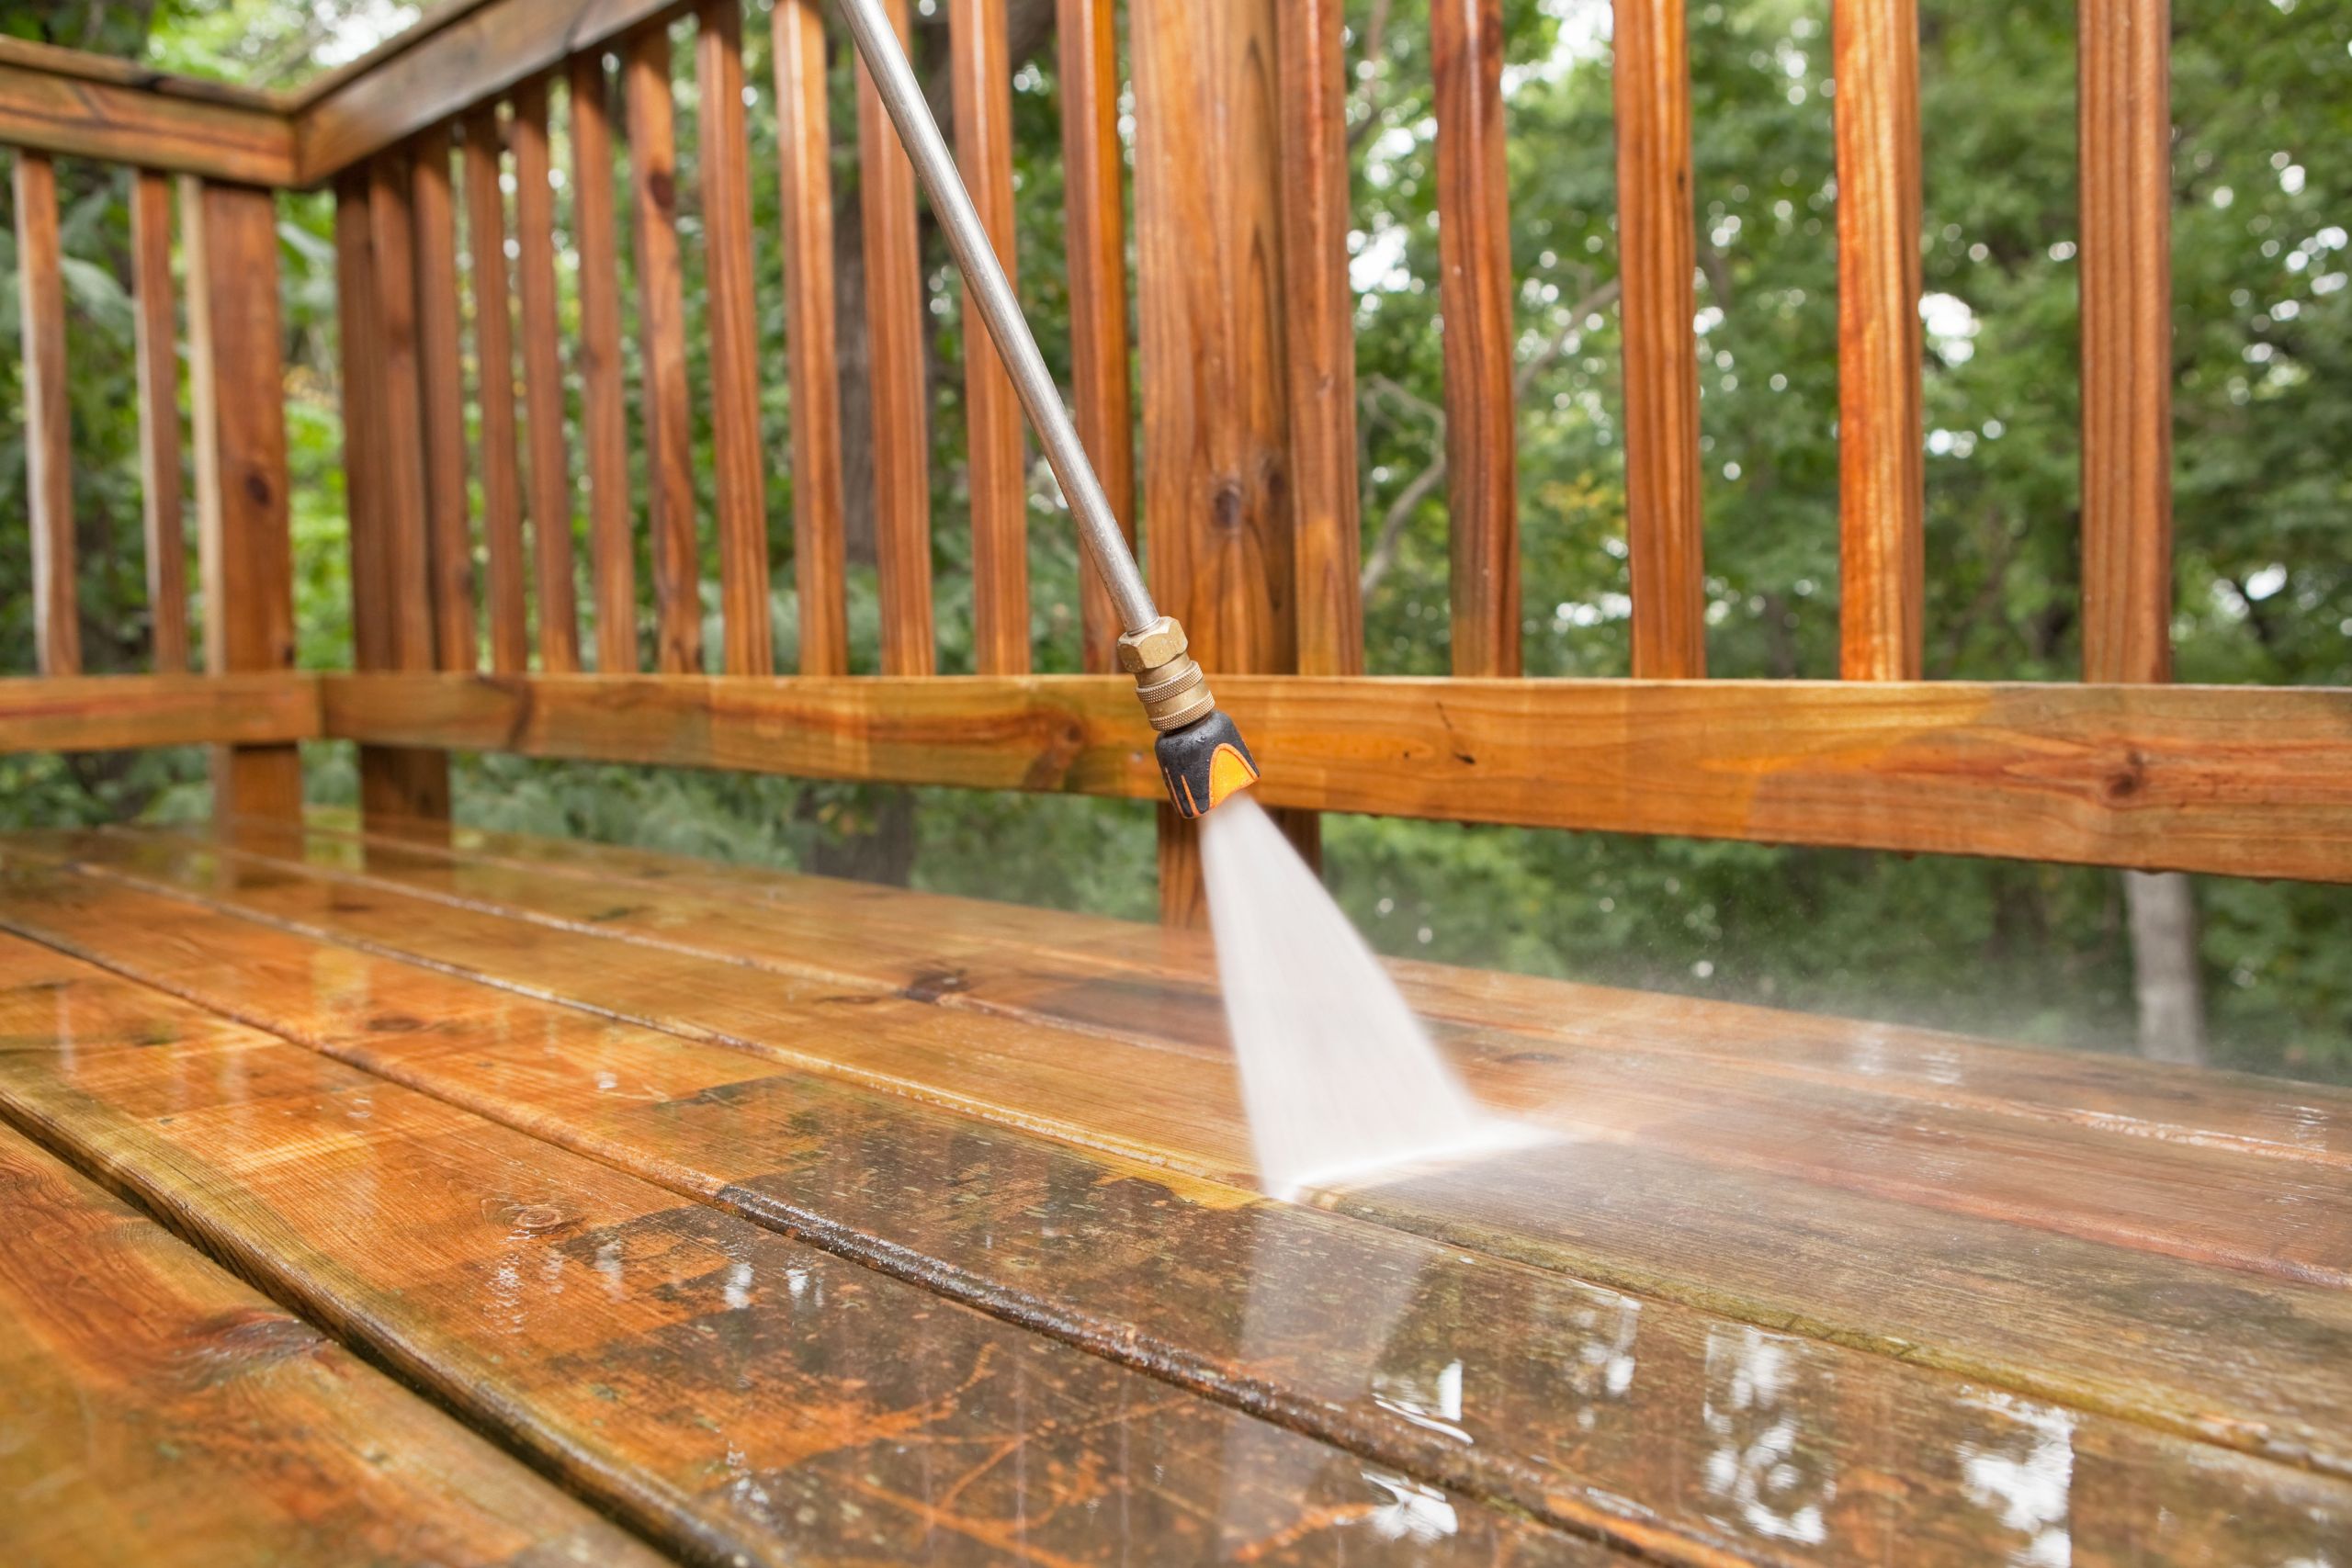 Cleaning A Painted Deck
 How to Power Wash a Wood Deck